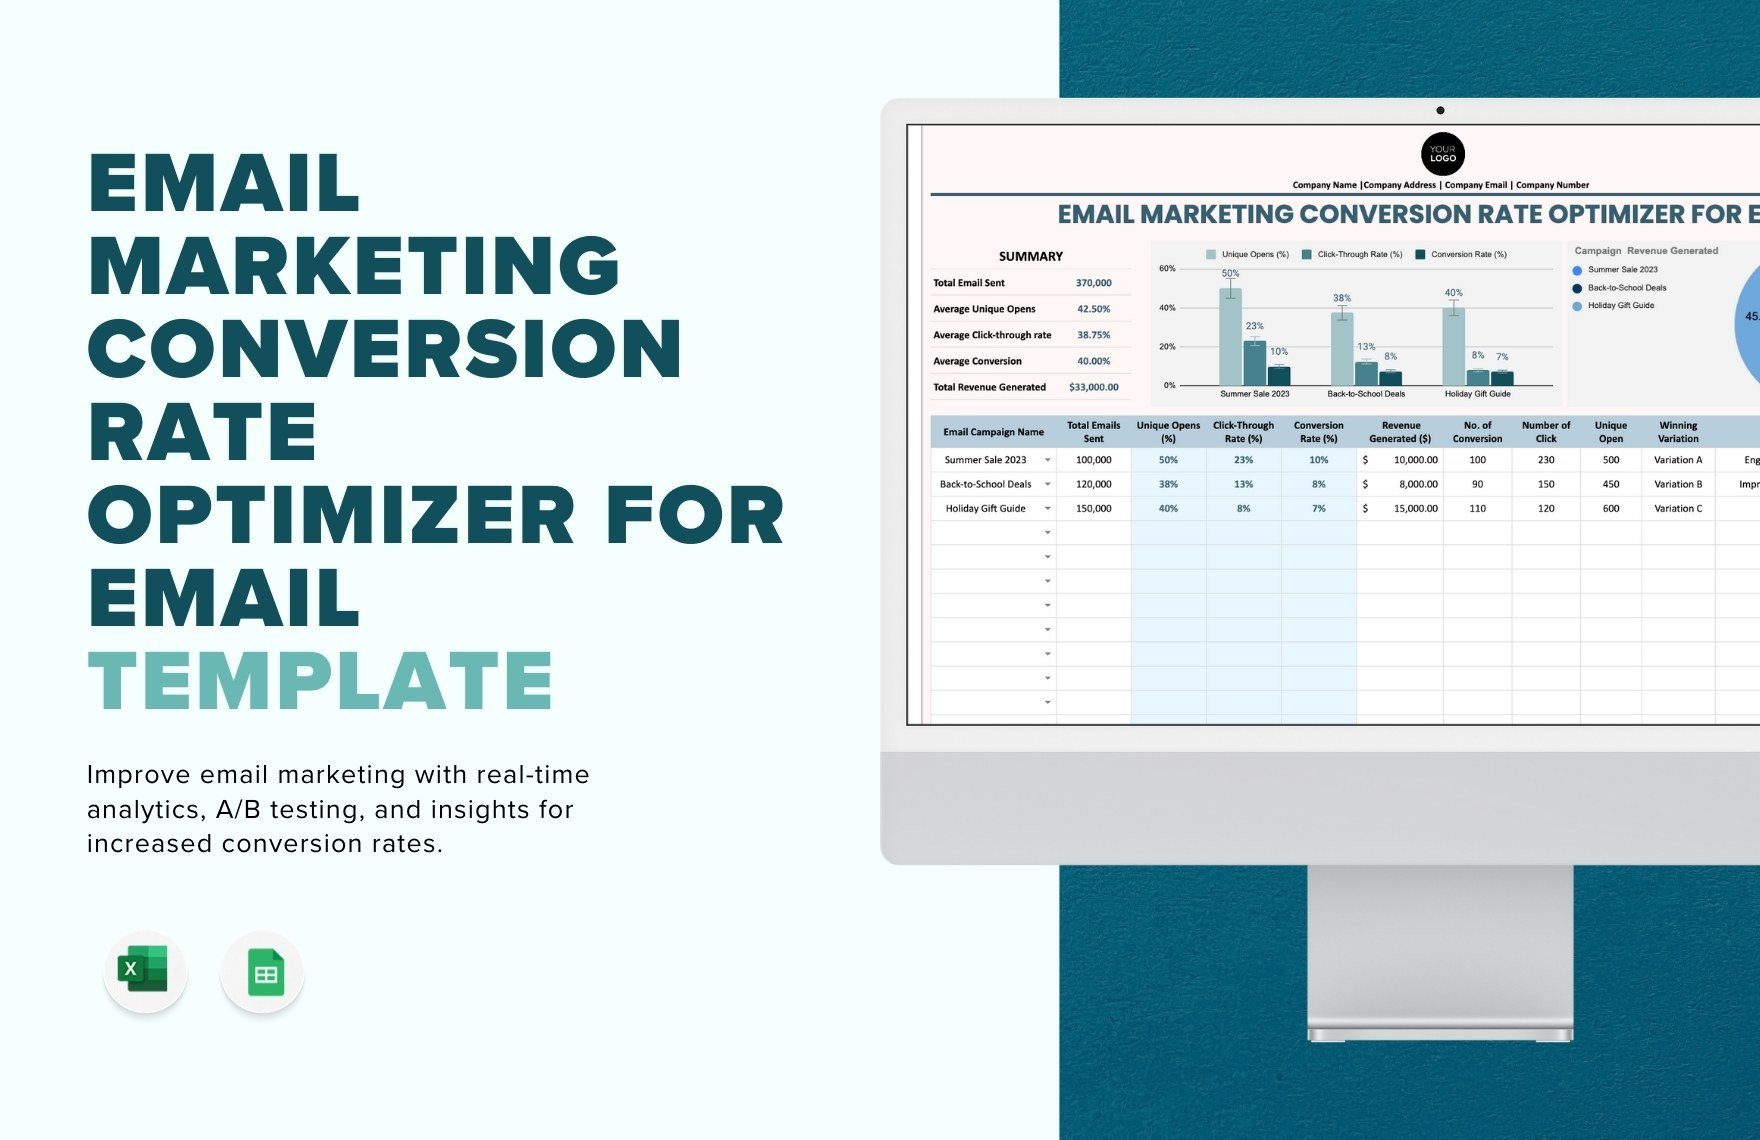 Email Marketing Conversion Rate Optimizer for Email Template